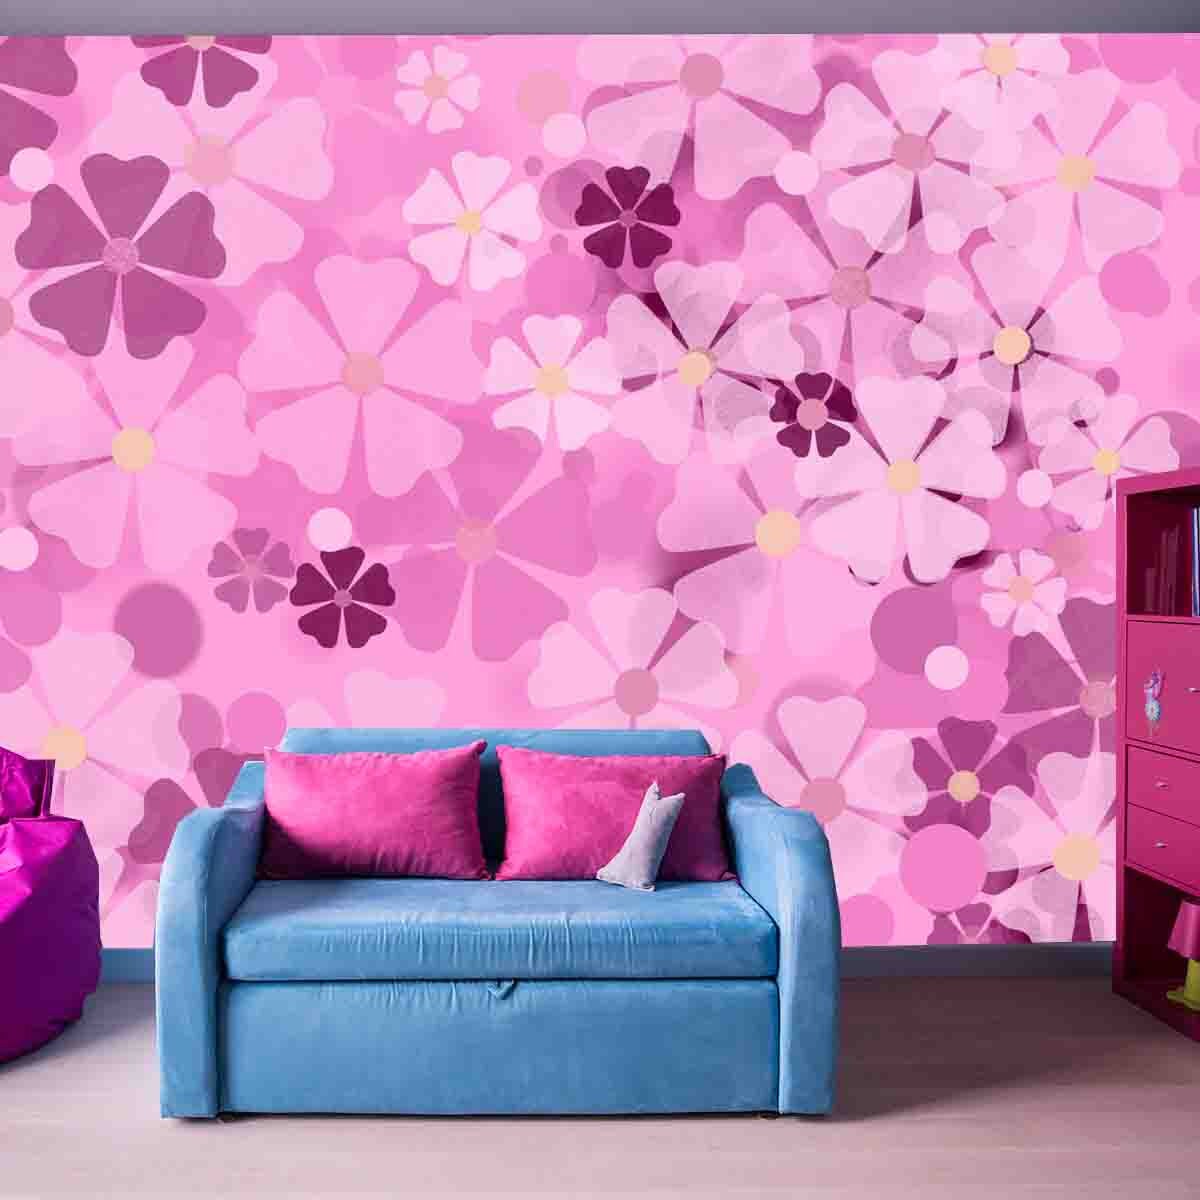 Spring Decorative Floral Blurred Background with Light and Dark Pink Abstract Flowers Wallpaper Teen Girl Bedroom Mural